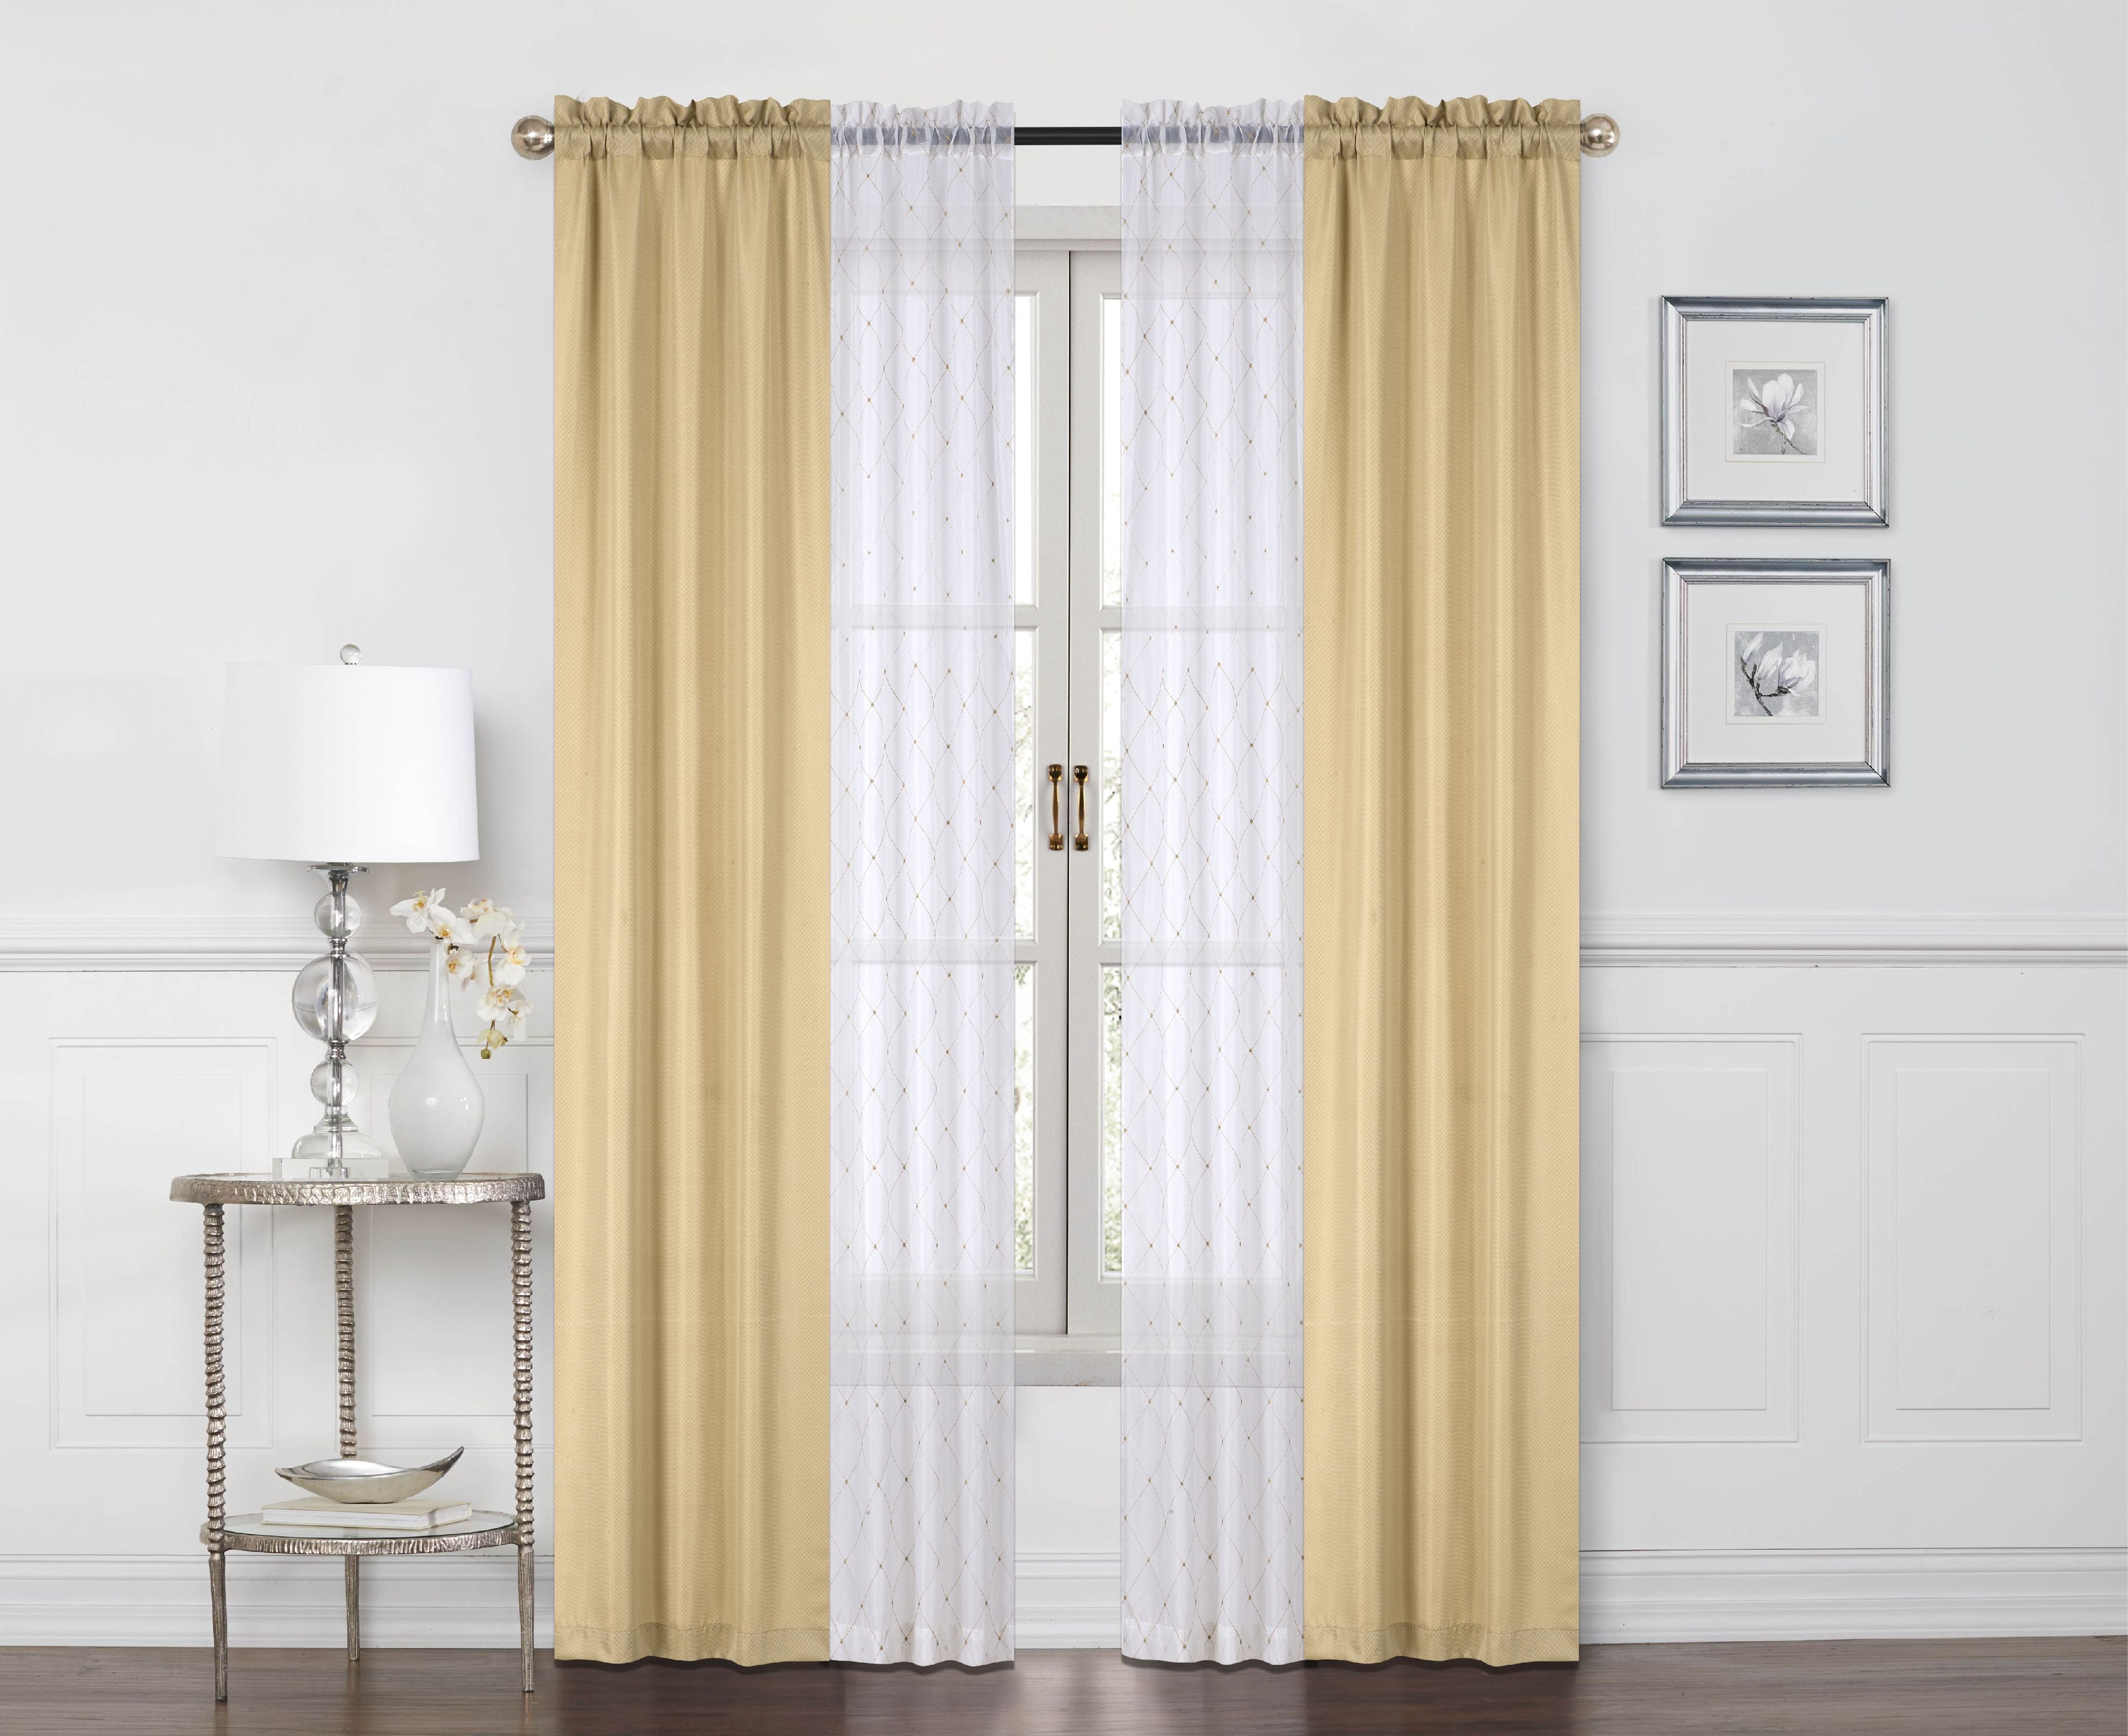 Double Rod Curtains For Living Room